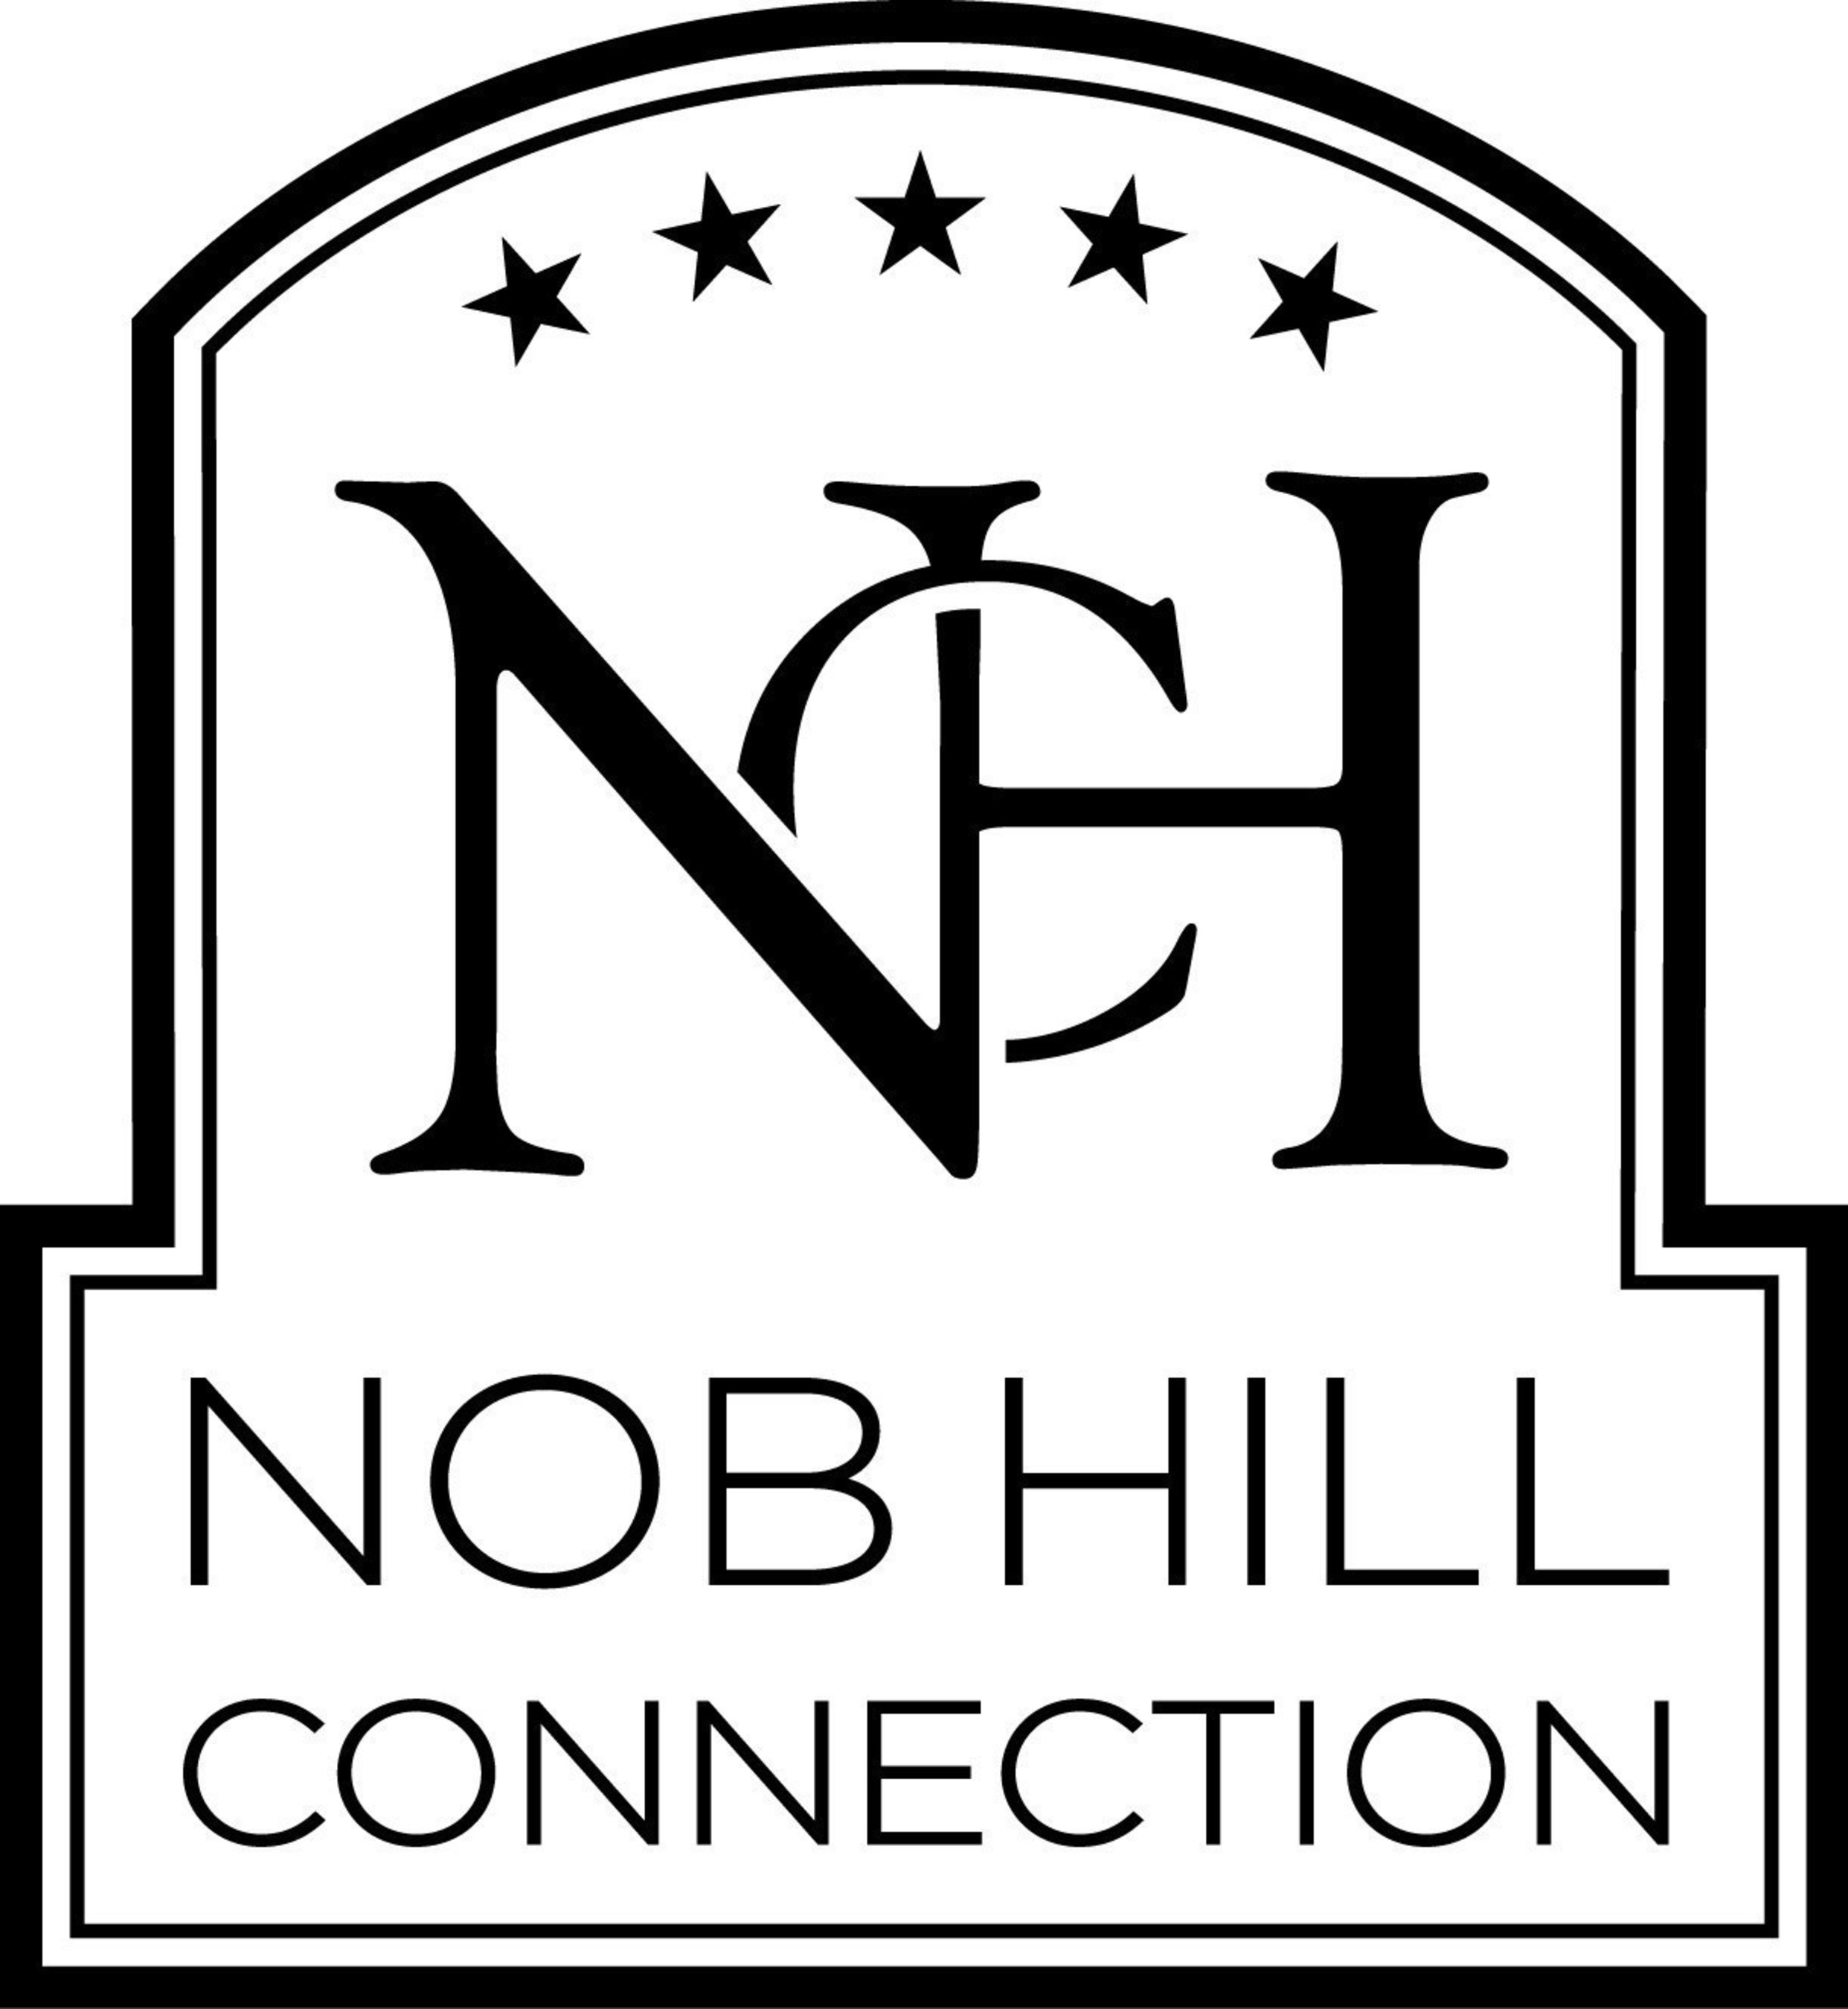 NOB HILL HOTELS AND THE MASONIC CENTER TO FORM THE NOB HILL CONNECTION